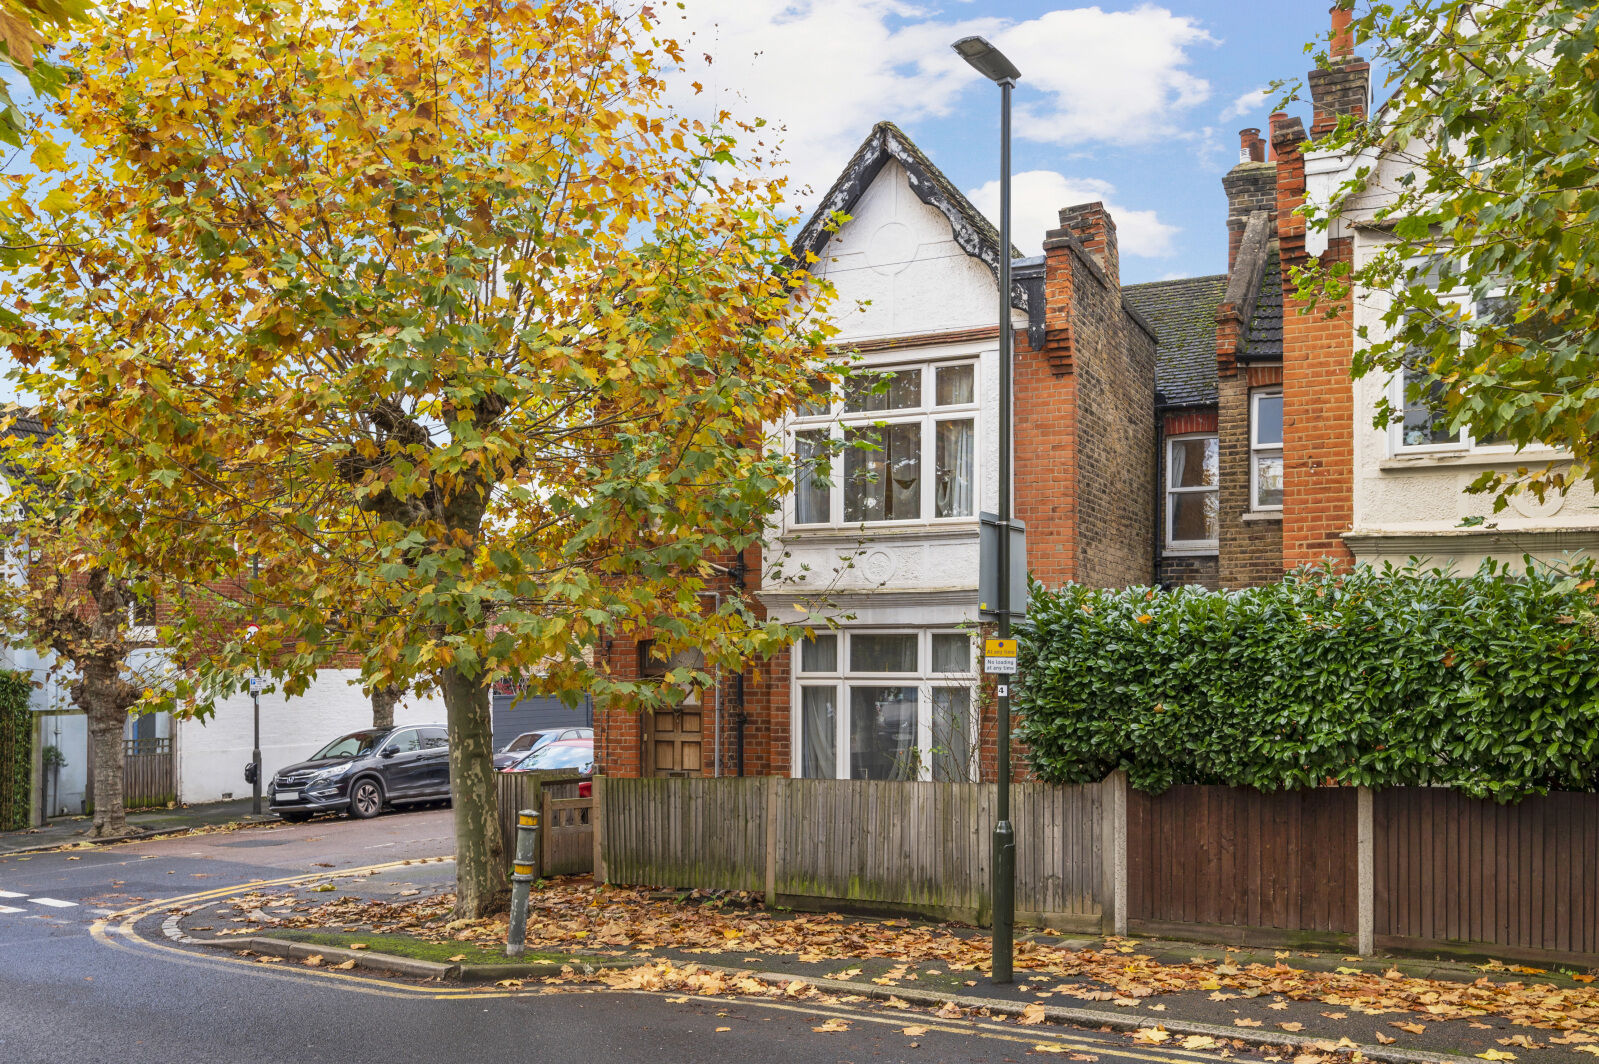 3 bedroom end terraced house for sale Lower Downs Road, Raynes Park, SW20, main image